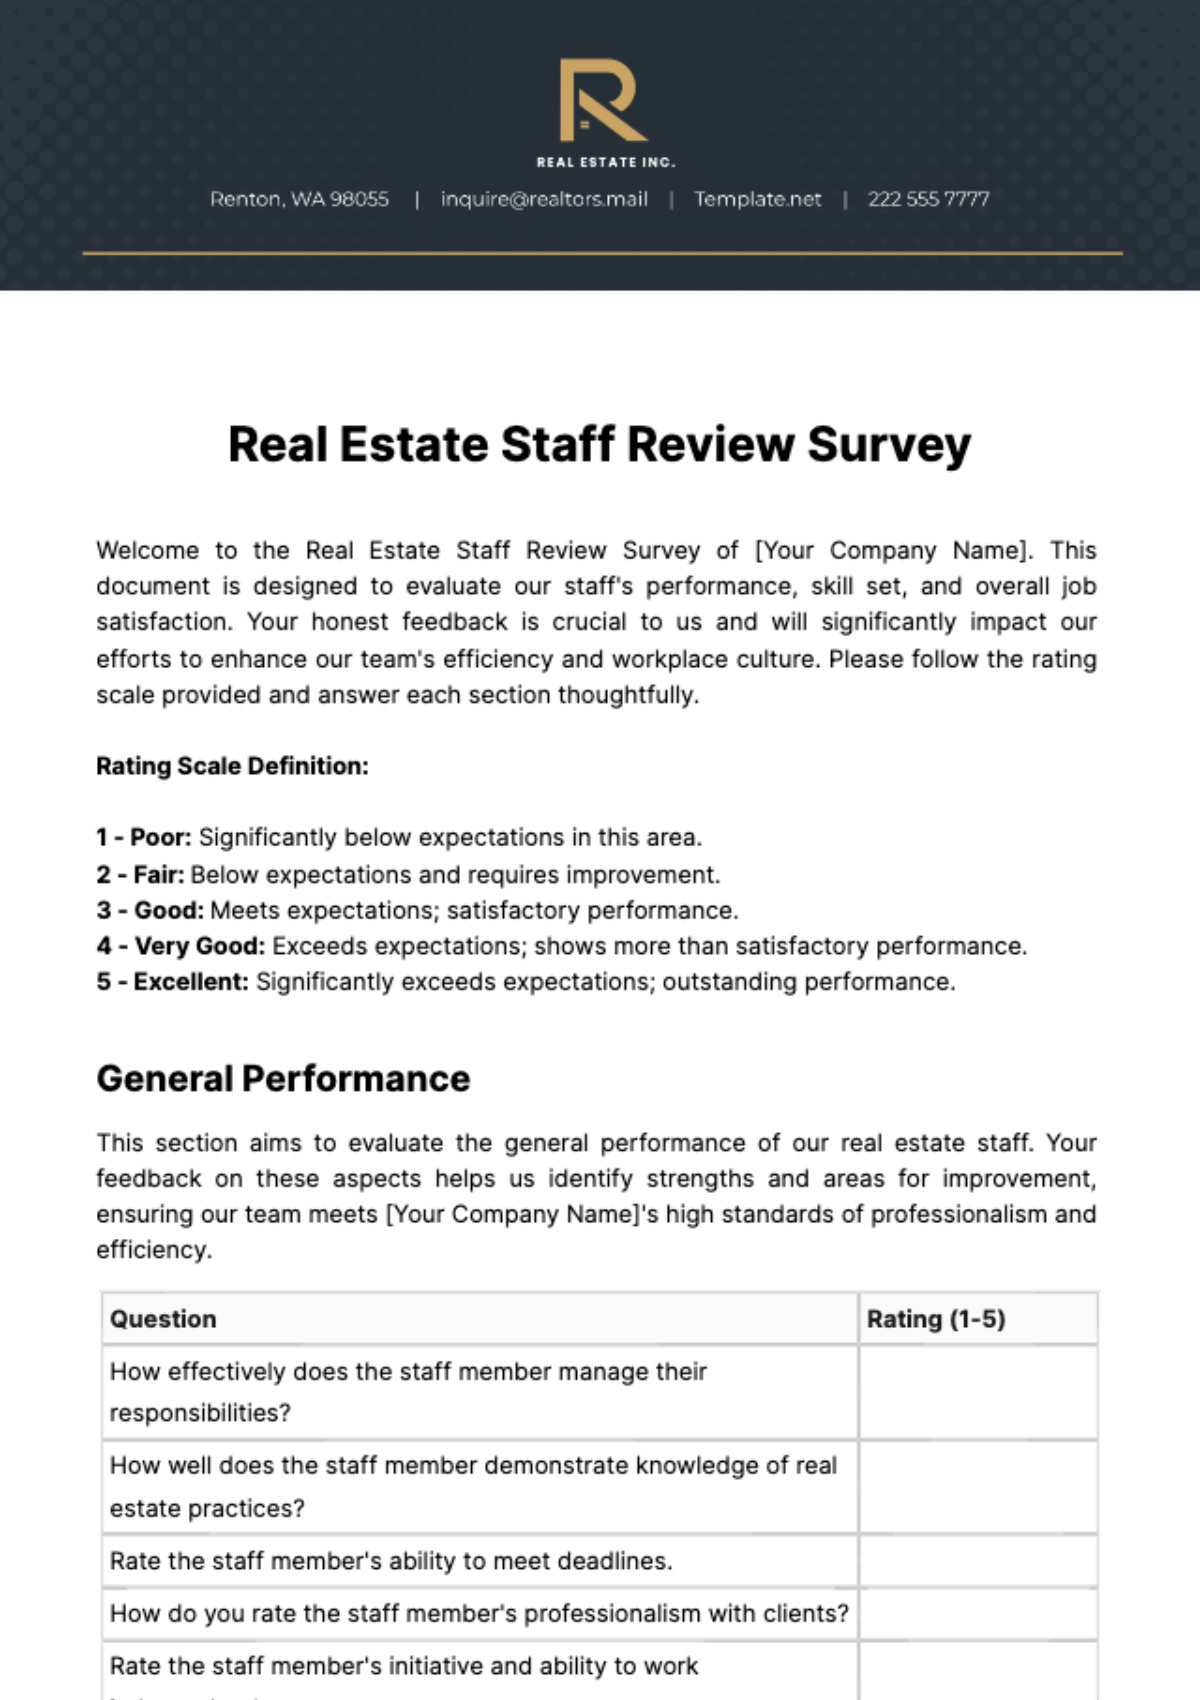 Real Estate Staff Review Survey Template